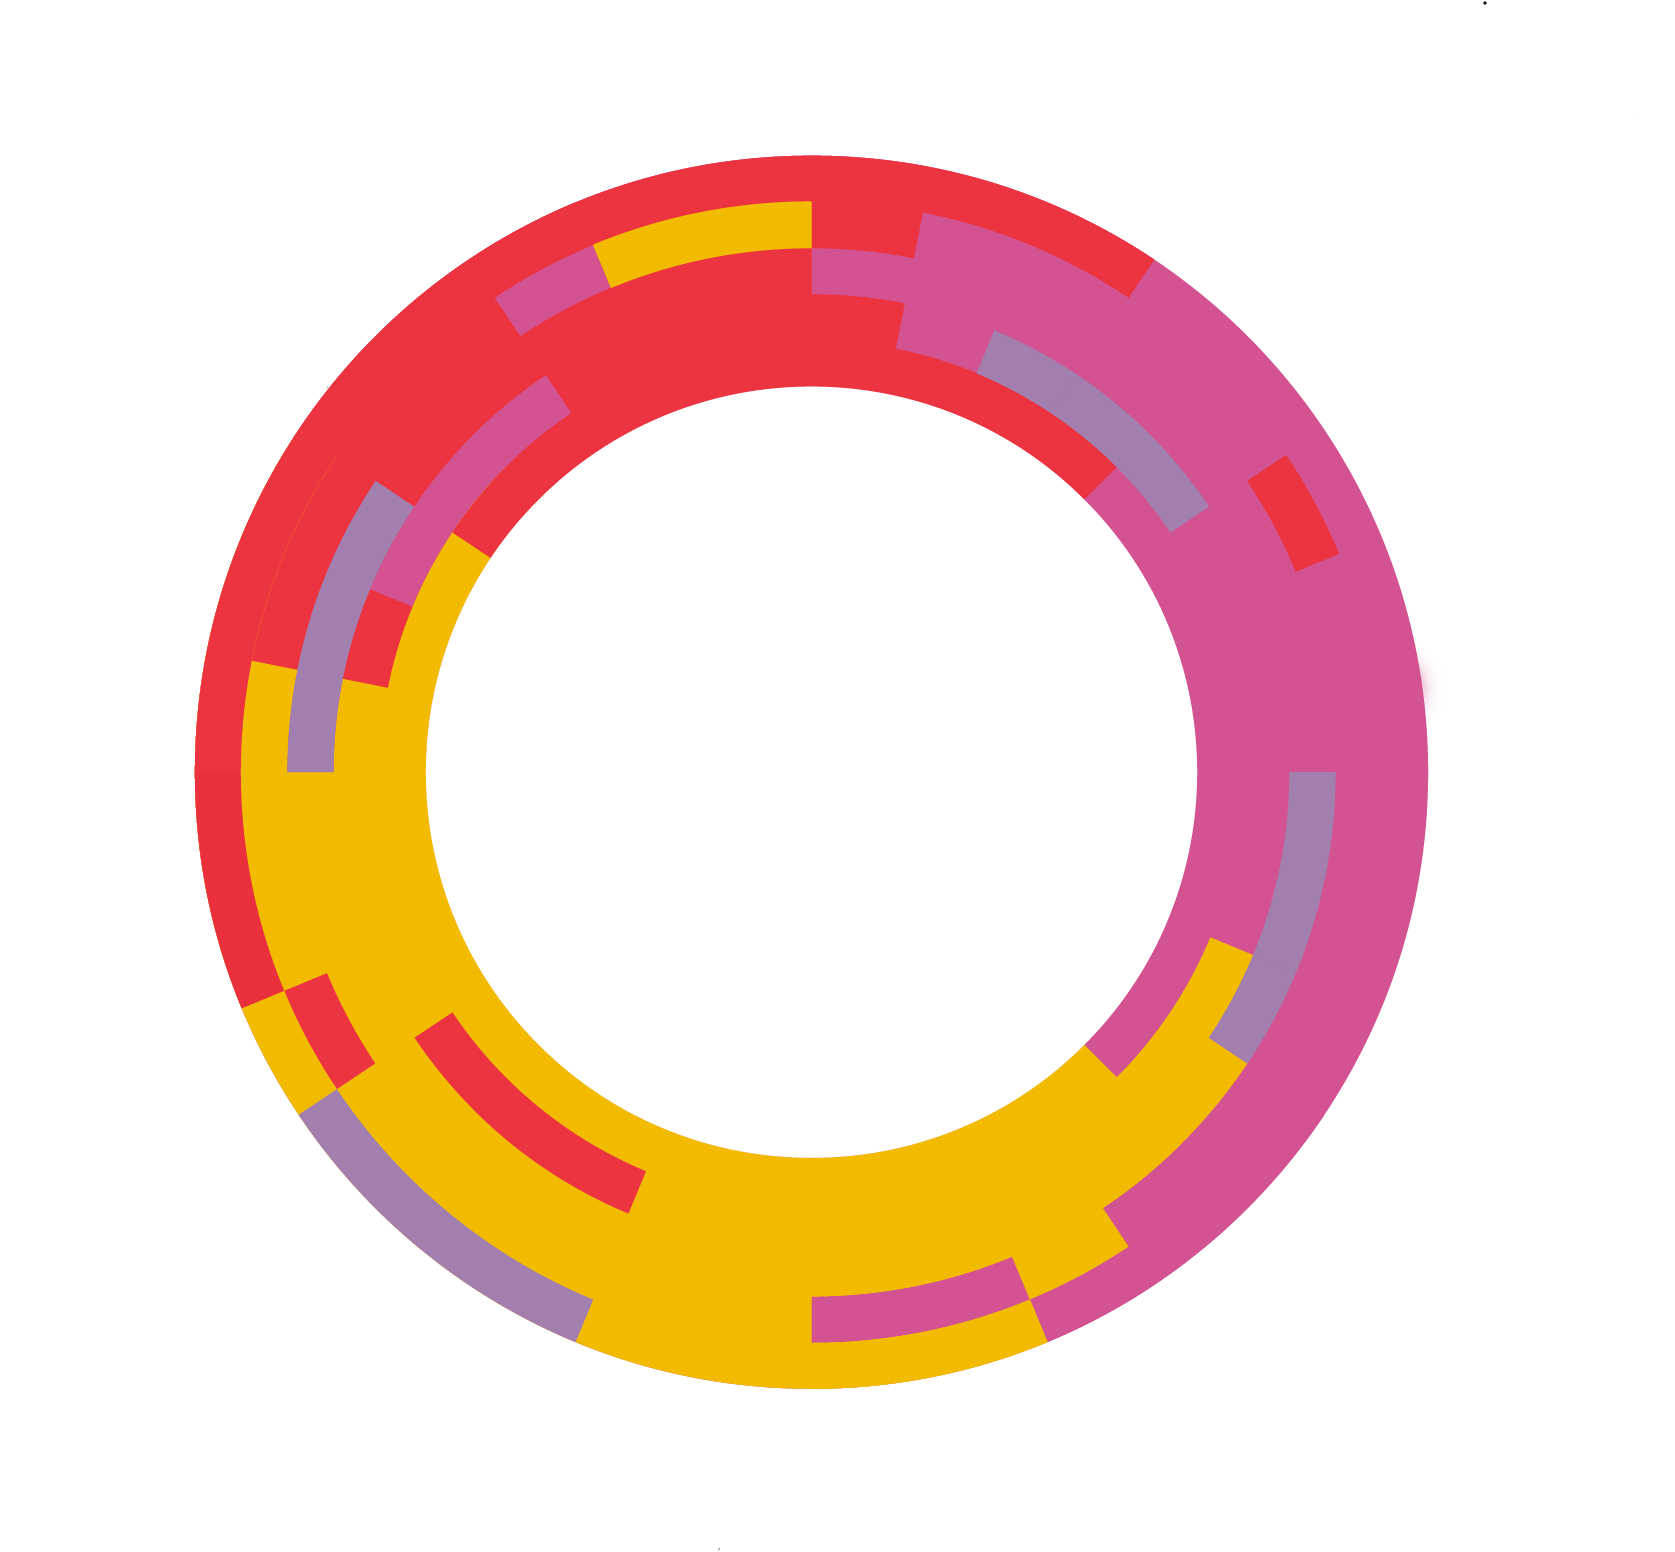 A red, pink and yellow version of the McConnell logo.